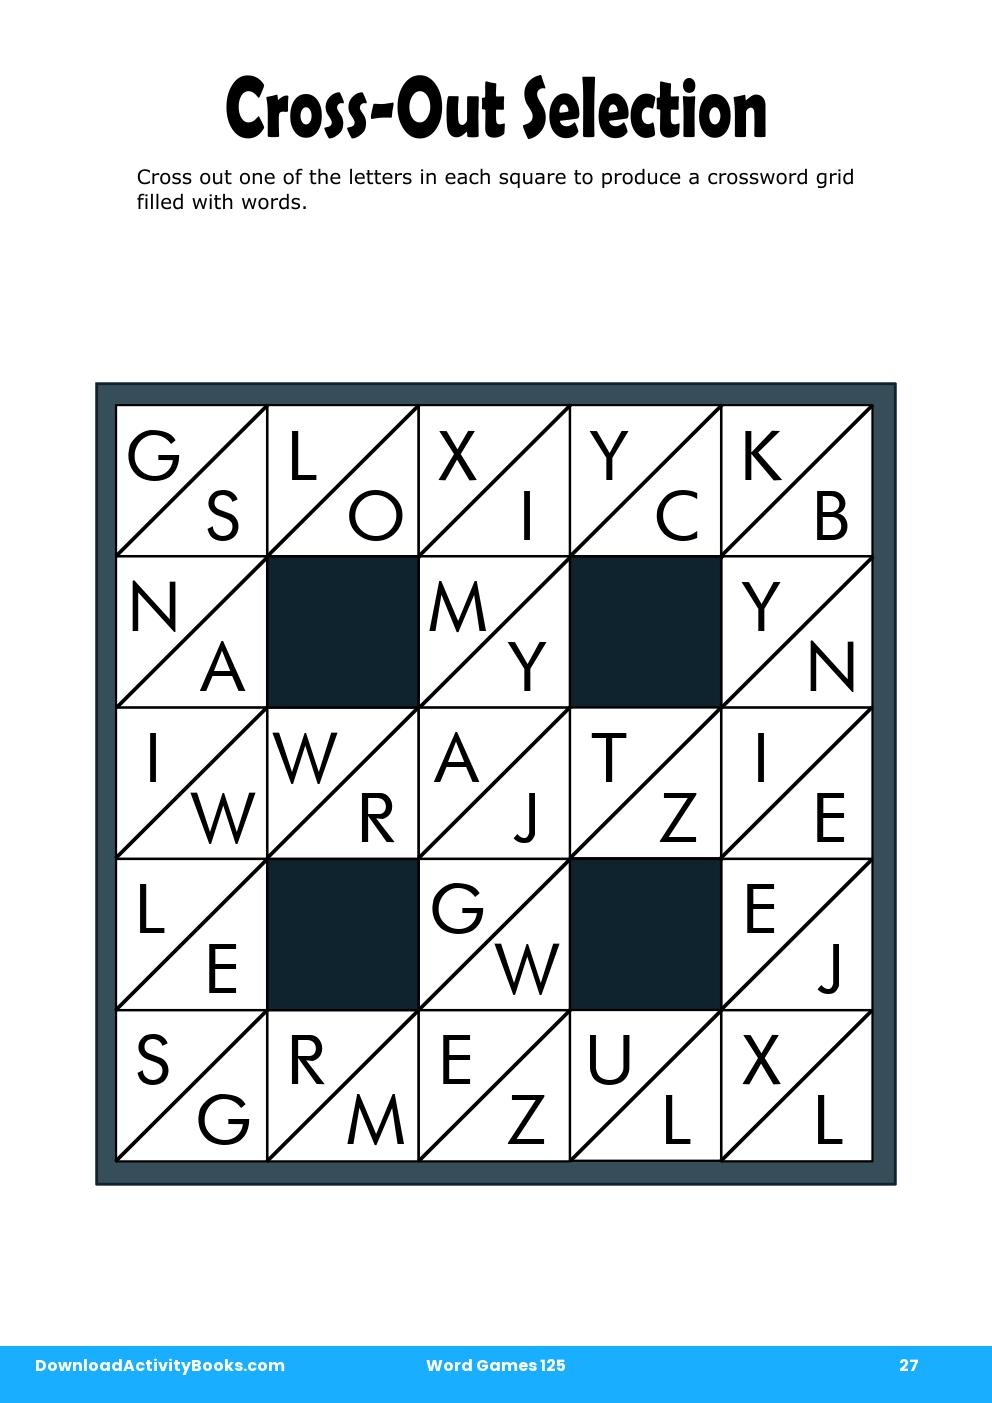 Cross-Out Selection in Word Games 125